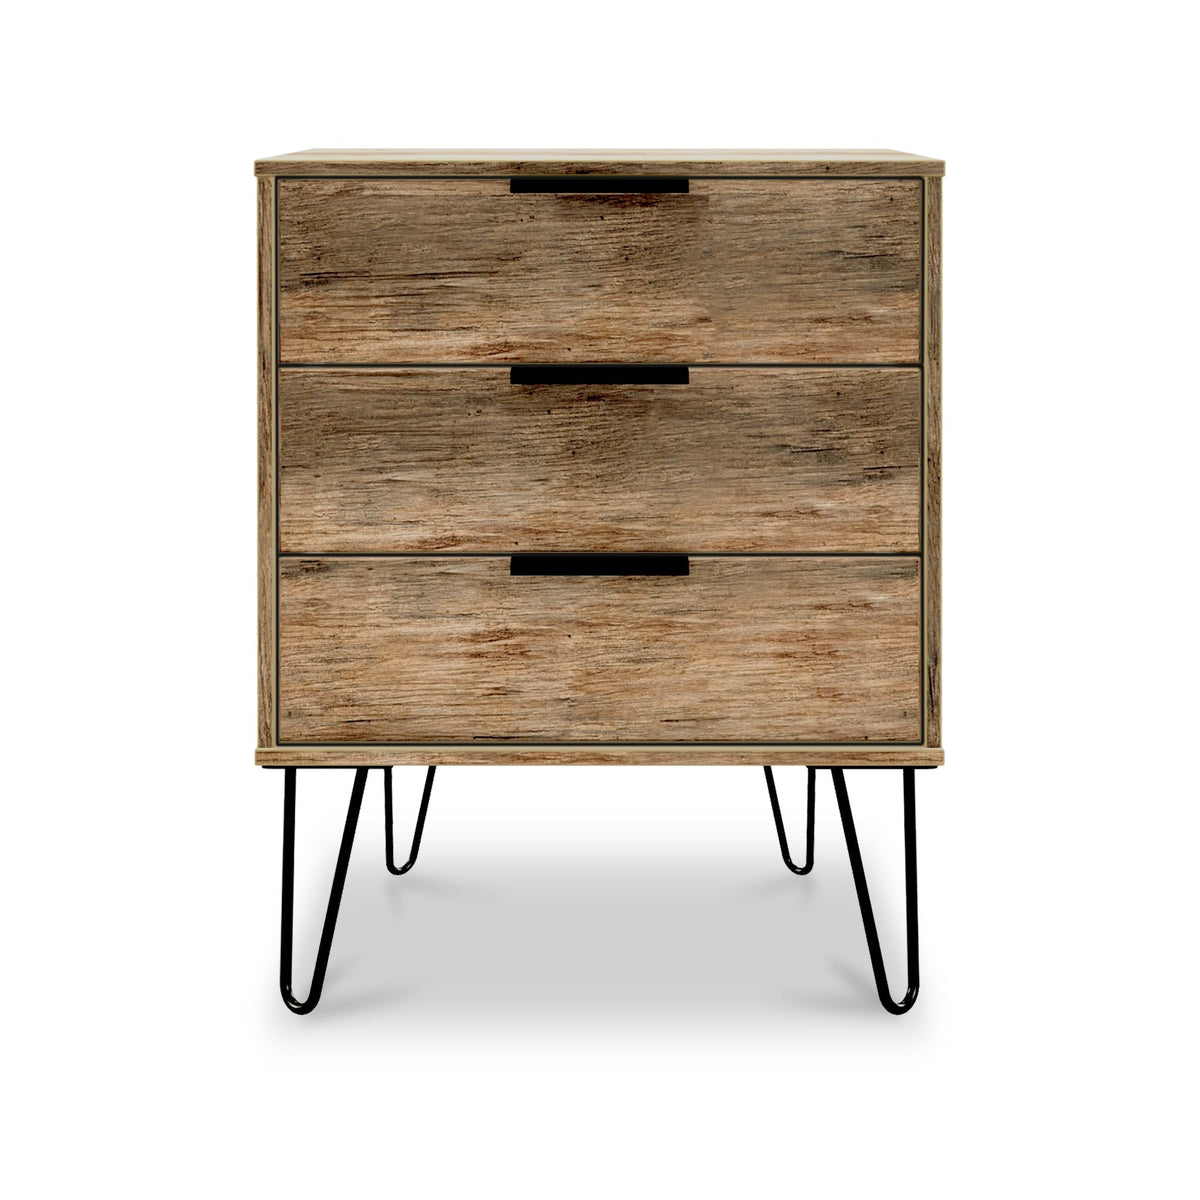 Moreno Rustic Oak 3 Drawer Midi Chest with Black Hairpin Legs from Roseland Furniture